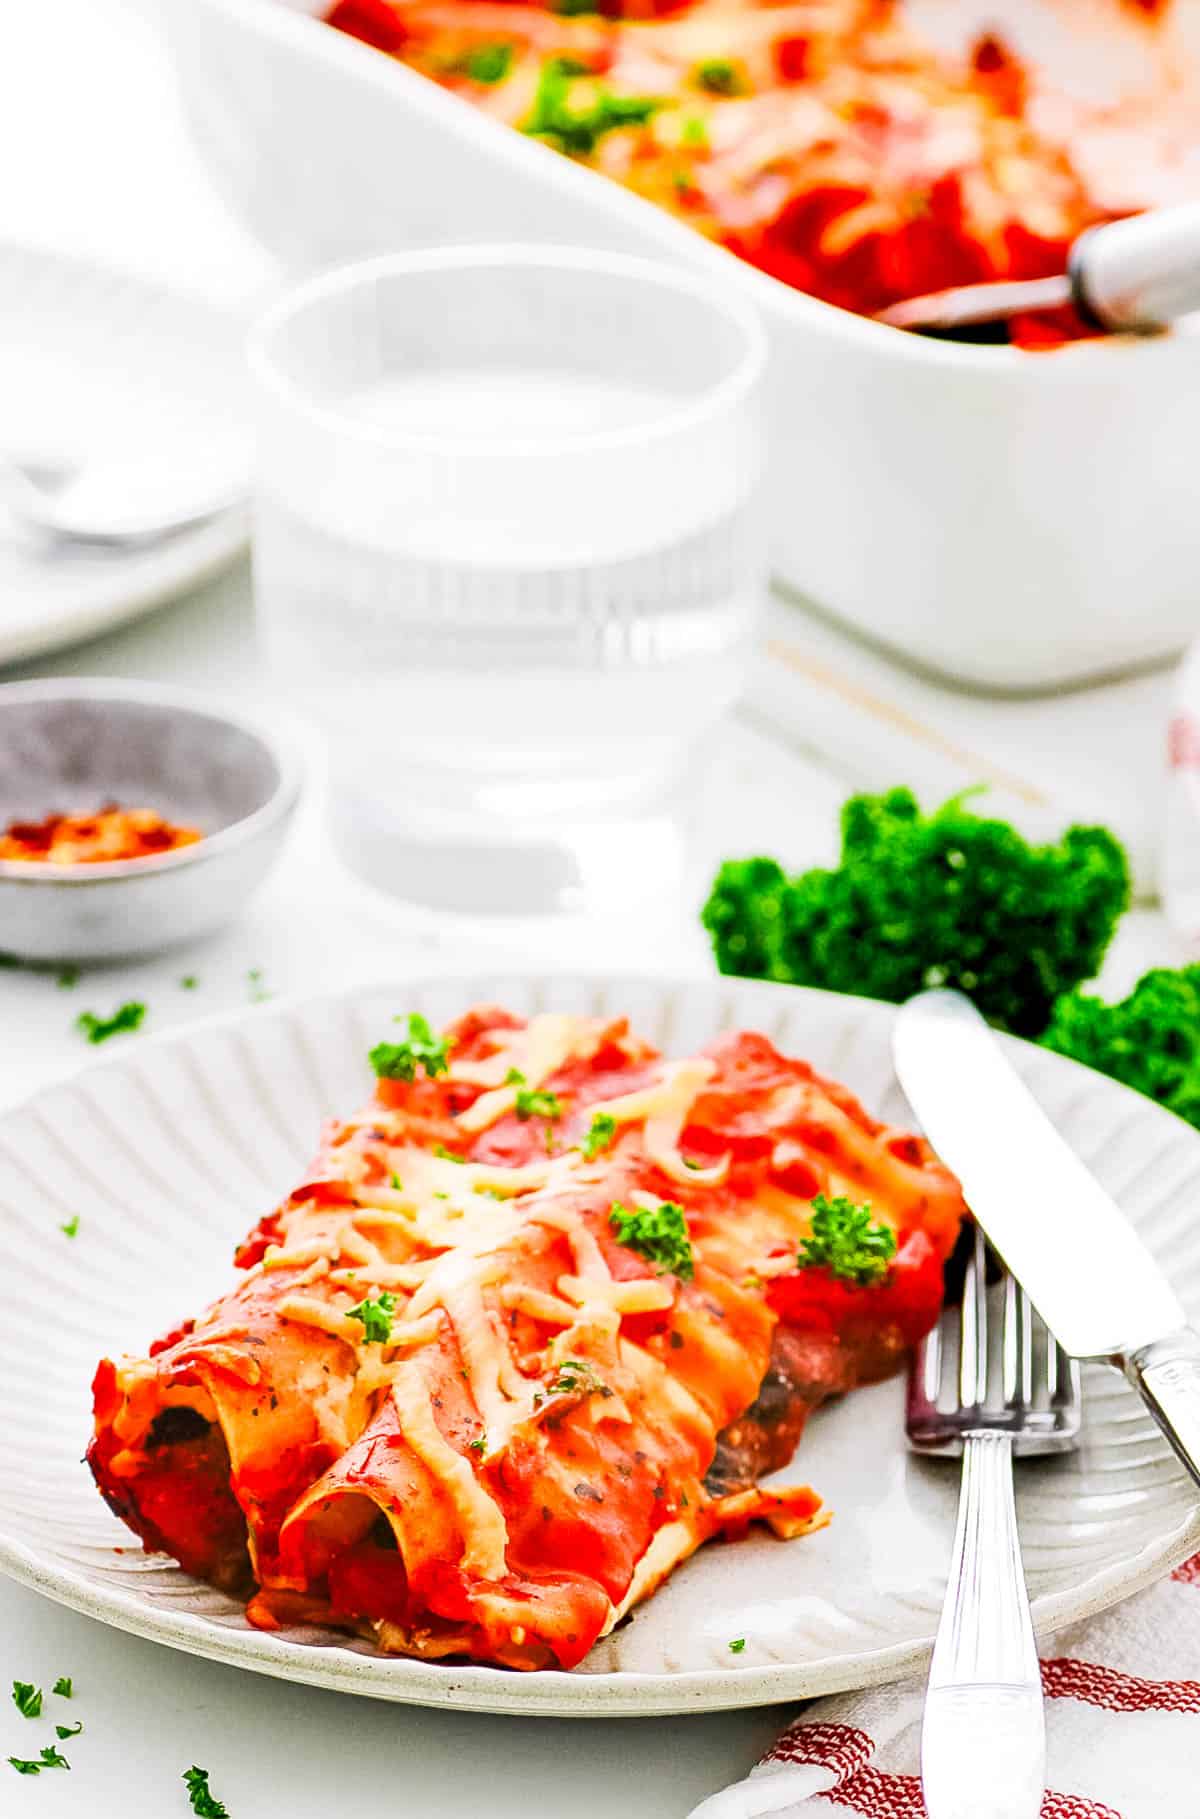 Lasagna roll ups served on a white plate, with a fork and knife on the side.